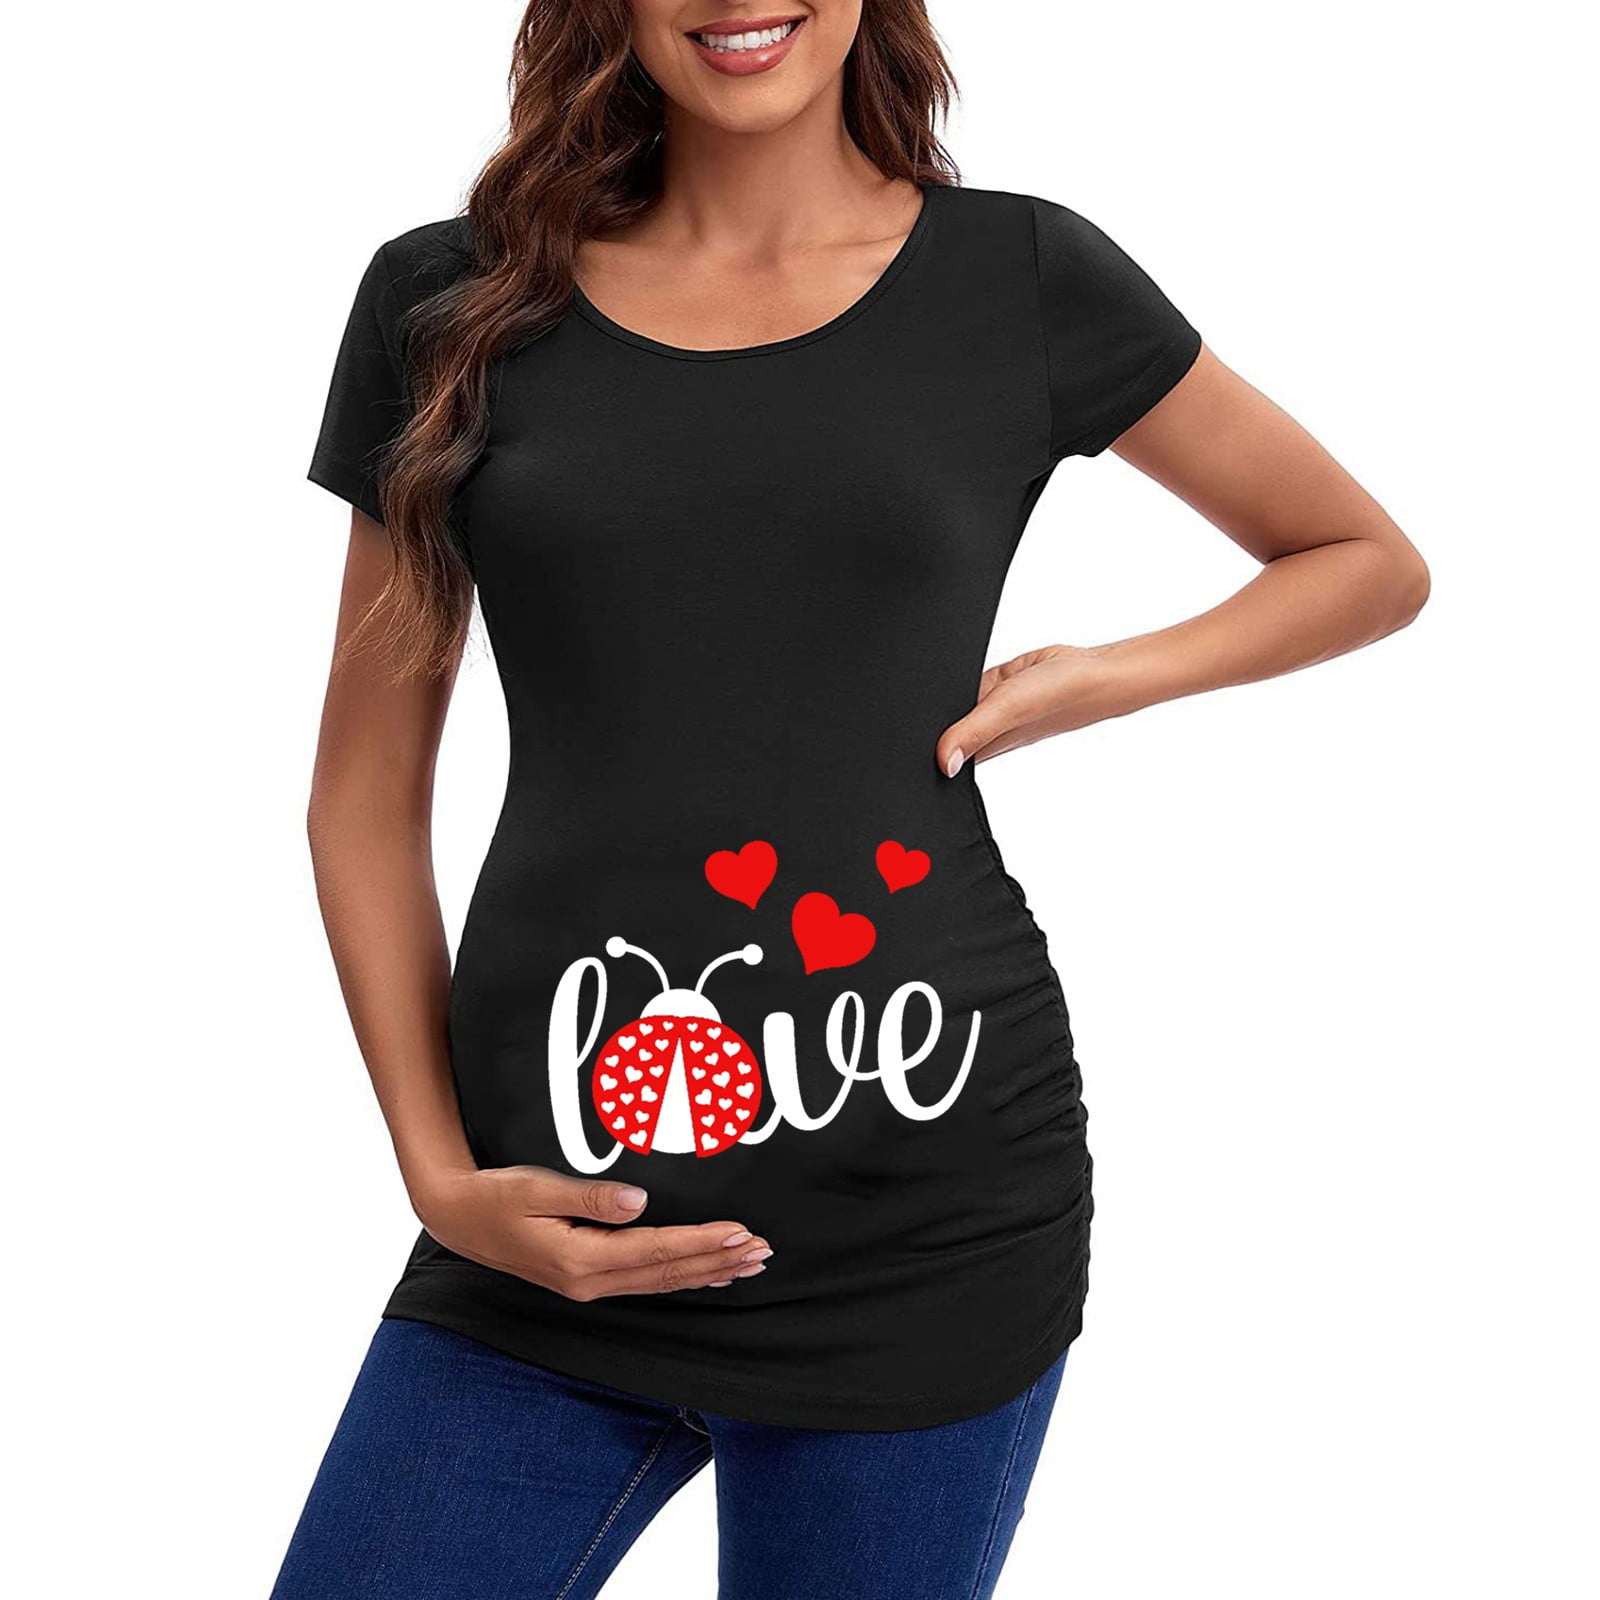 WAJCSHFS Maternity Clothes Spring Women's V Neck Maternity Clothes Tops  Side Ruched Pregnancy T Shirt (Black,XL)